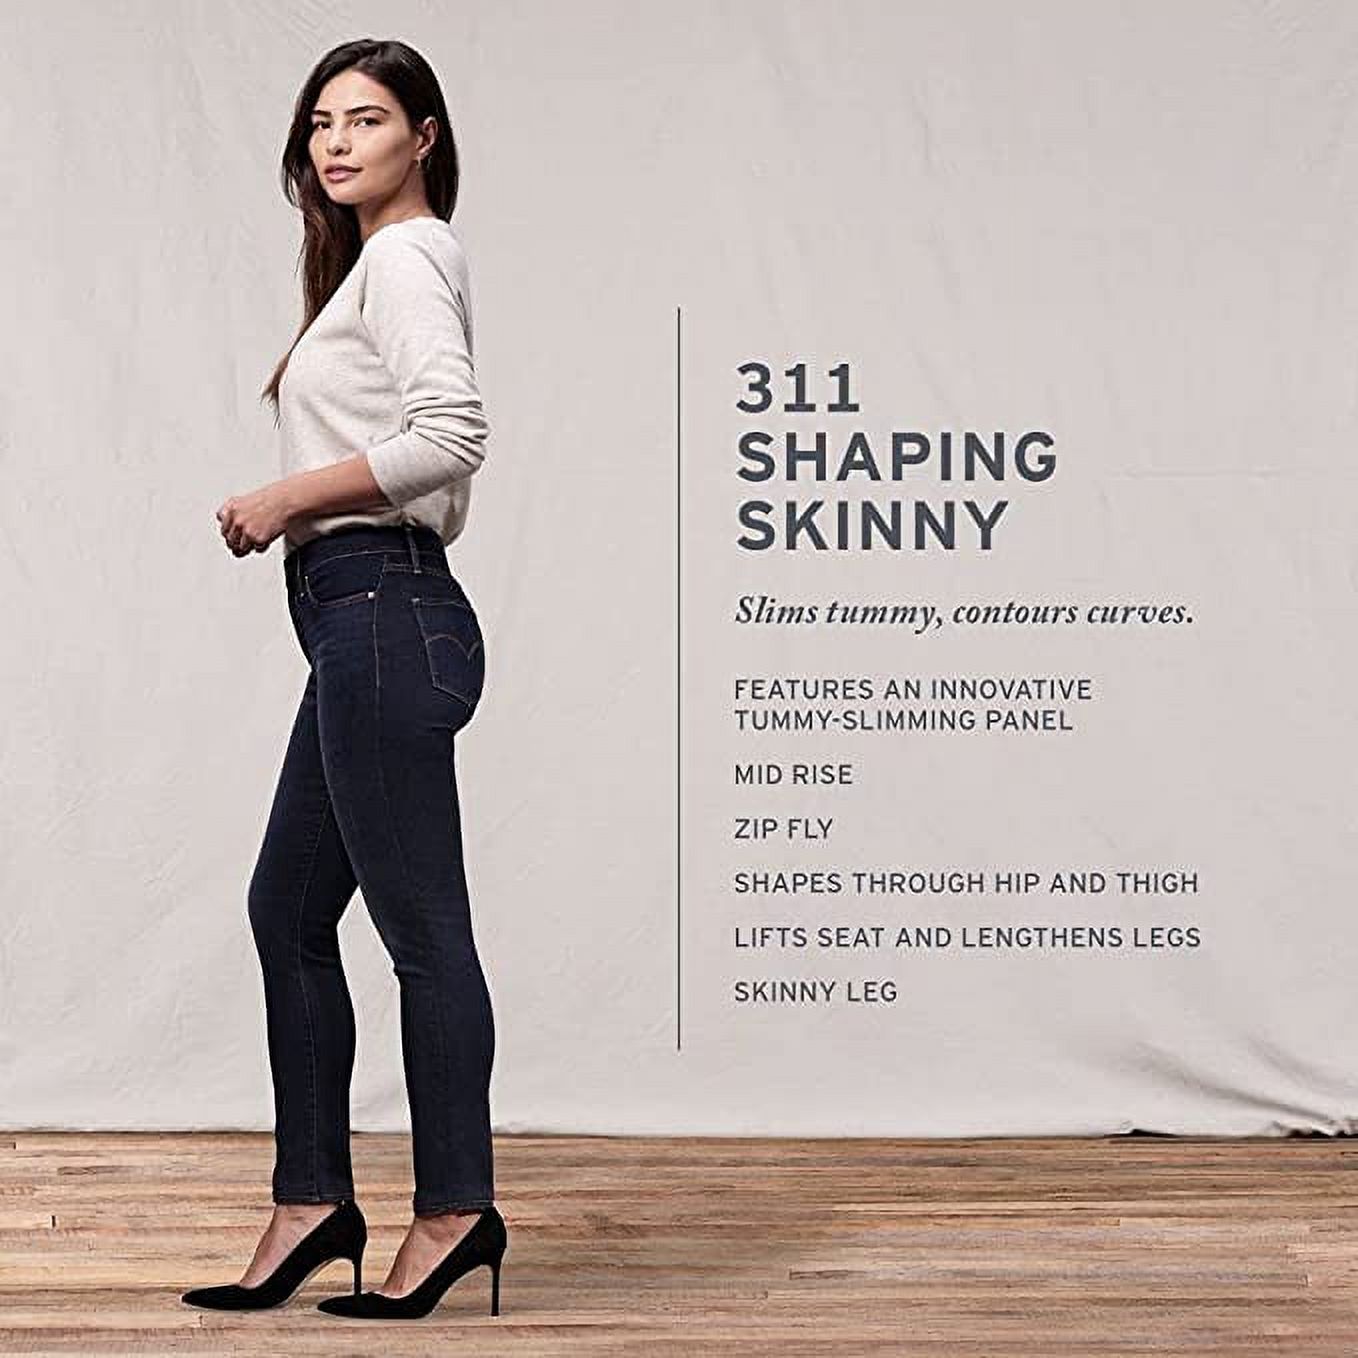 Levi’s Original Red Tab Women's 311 Shaping Skinny Jeans - image 3 of 4